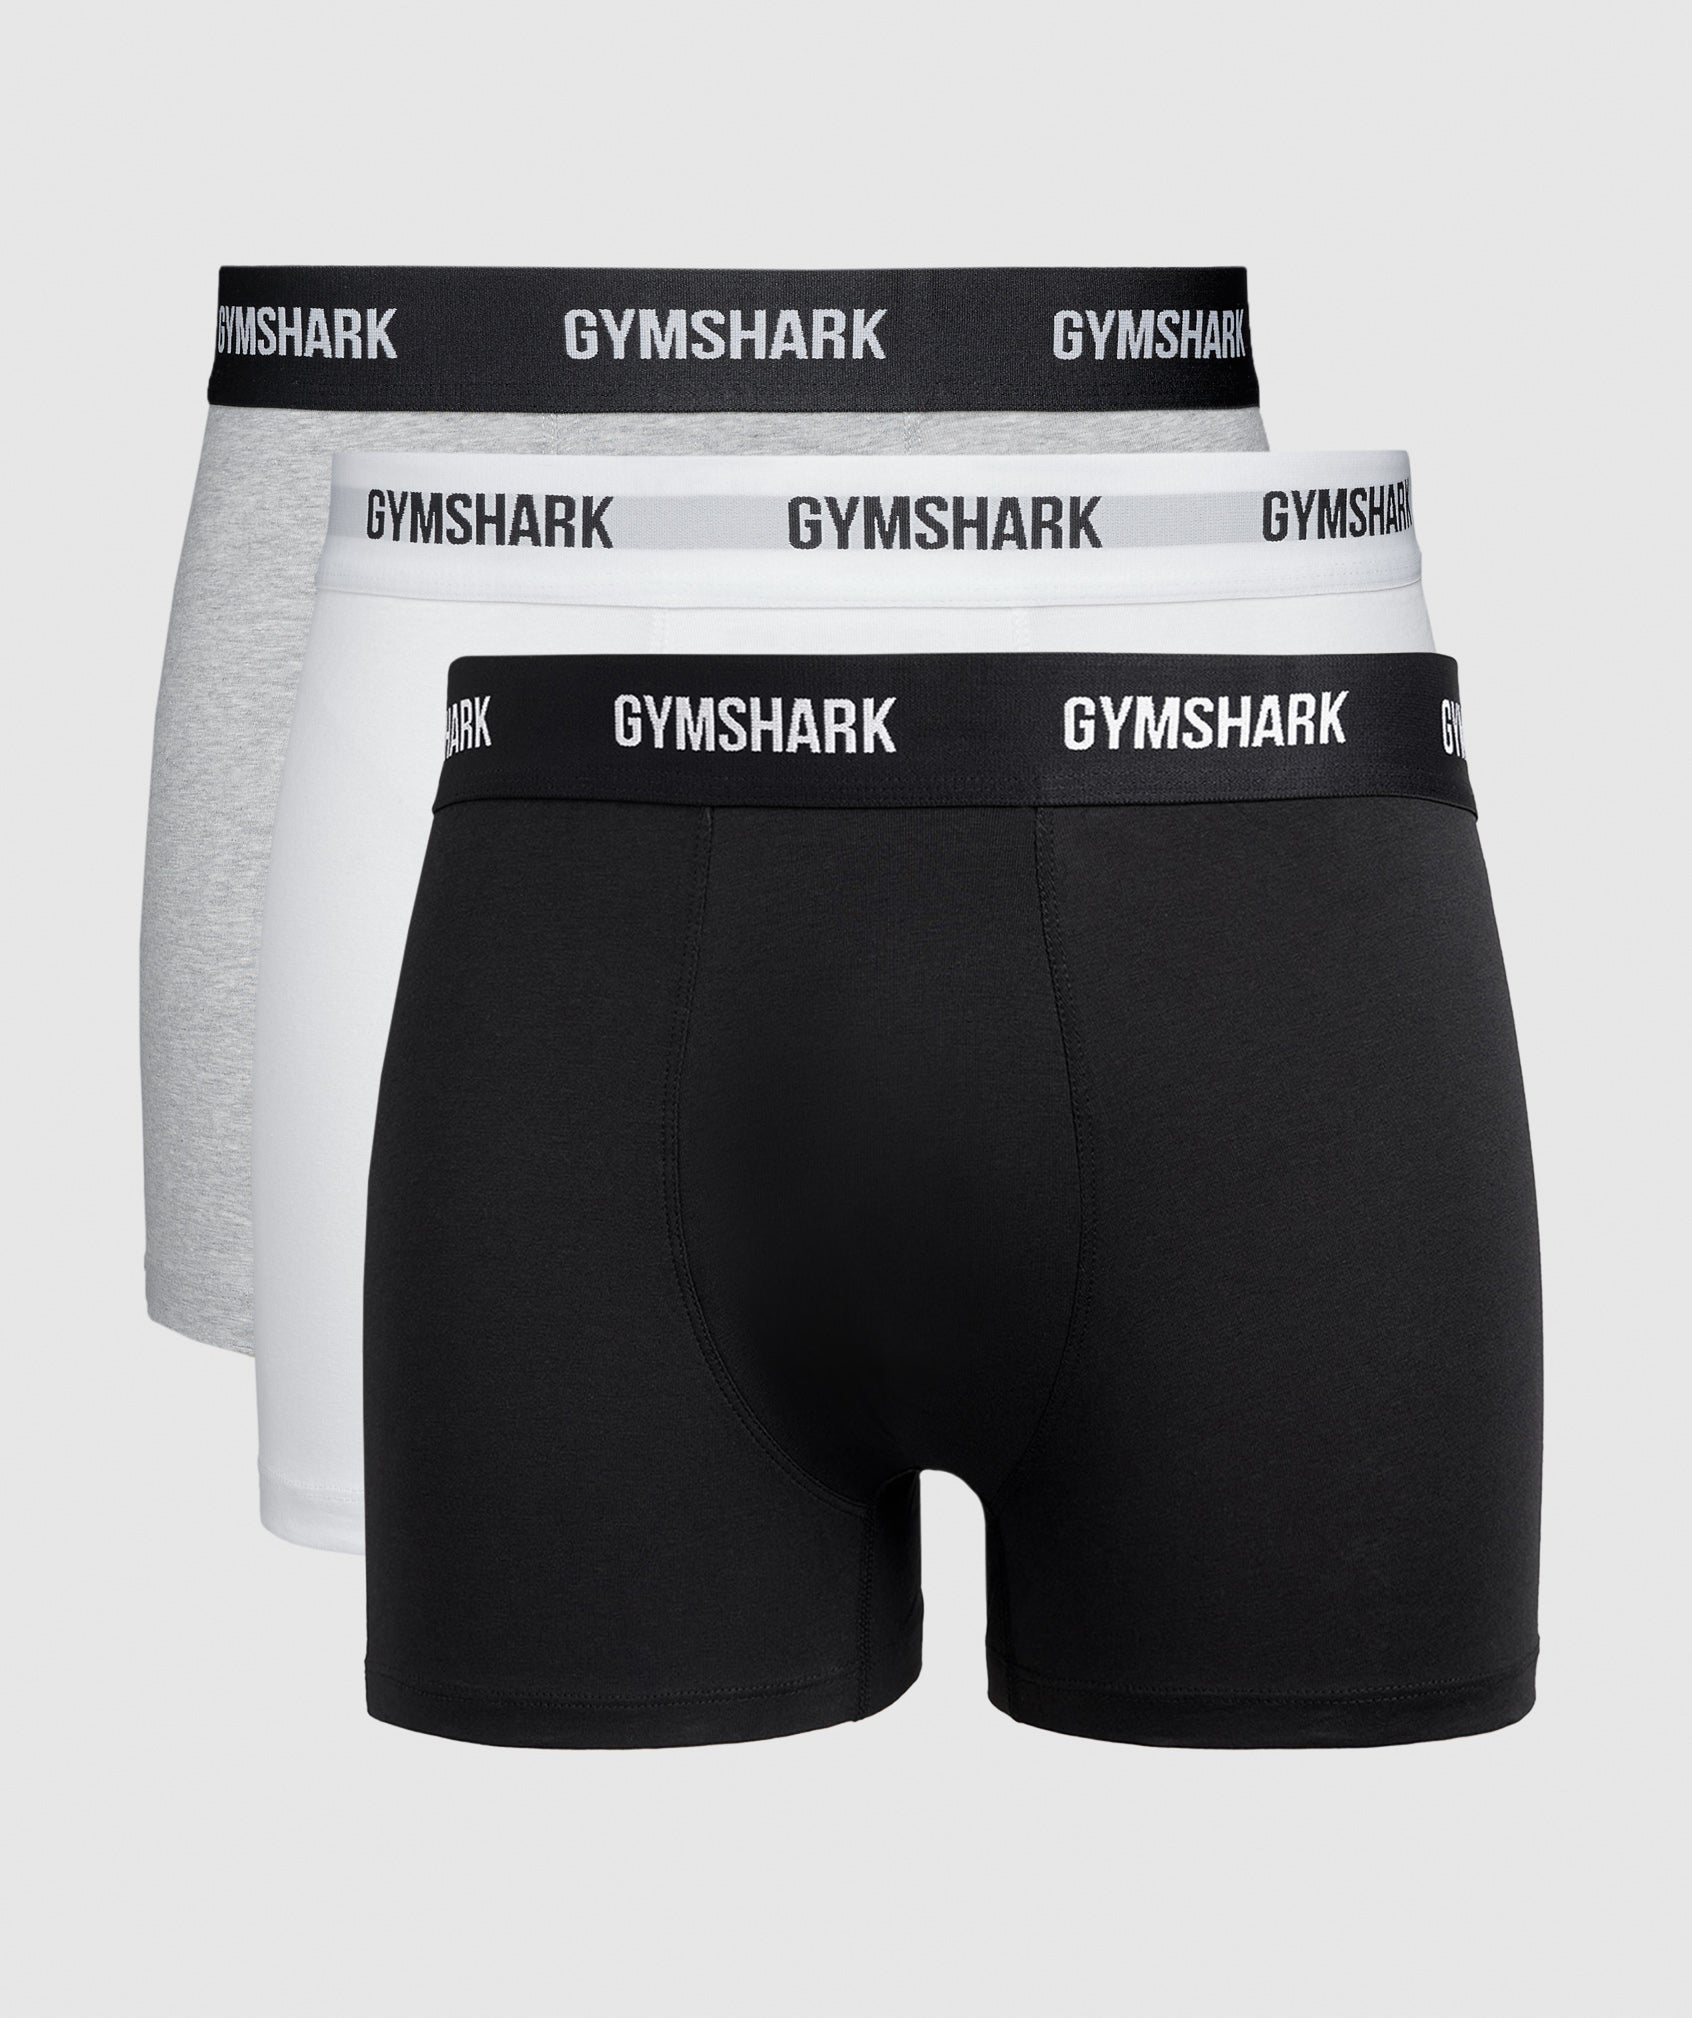 Boxers 3 PK in White/Light Grey Core Marl/Black is out of stock